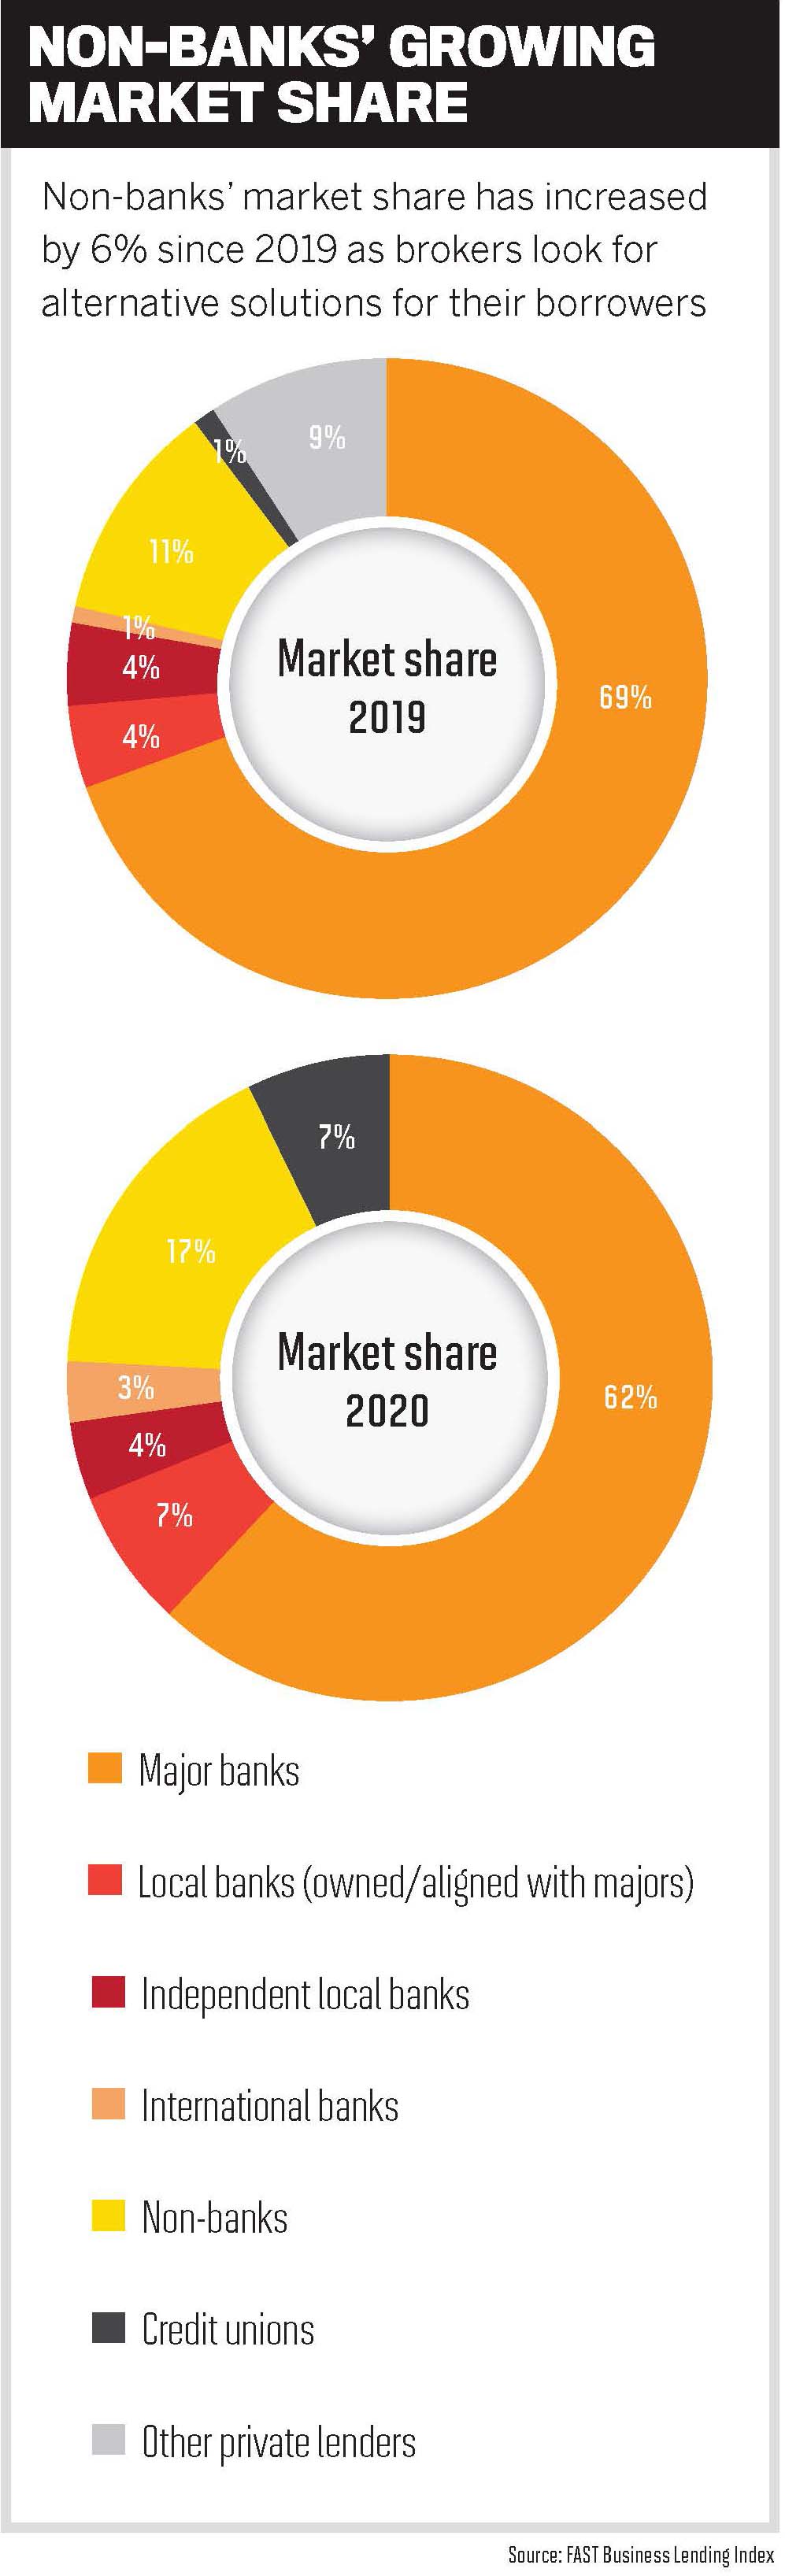 Non-banks' growing market share